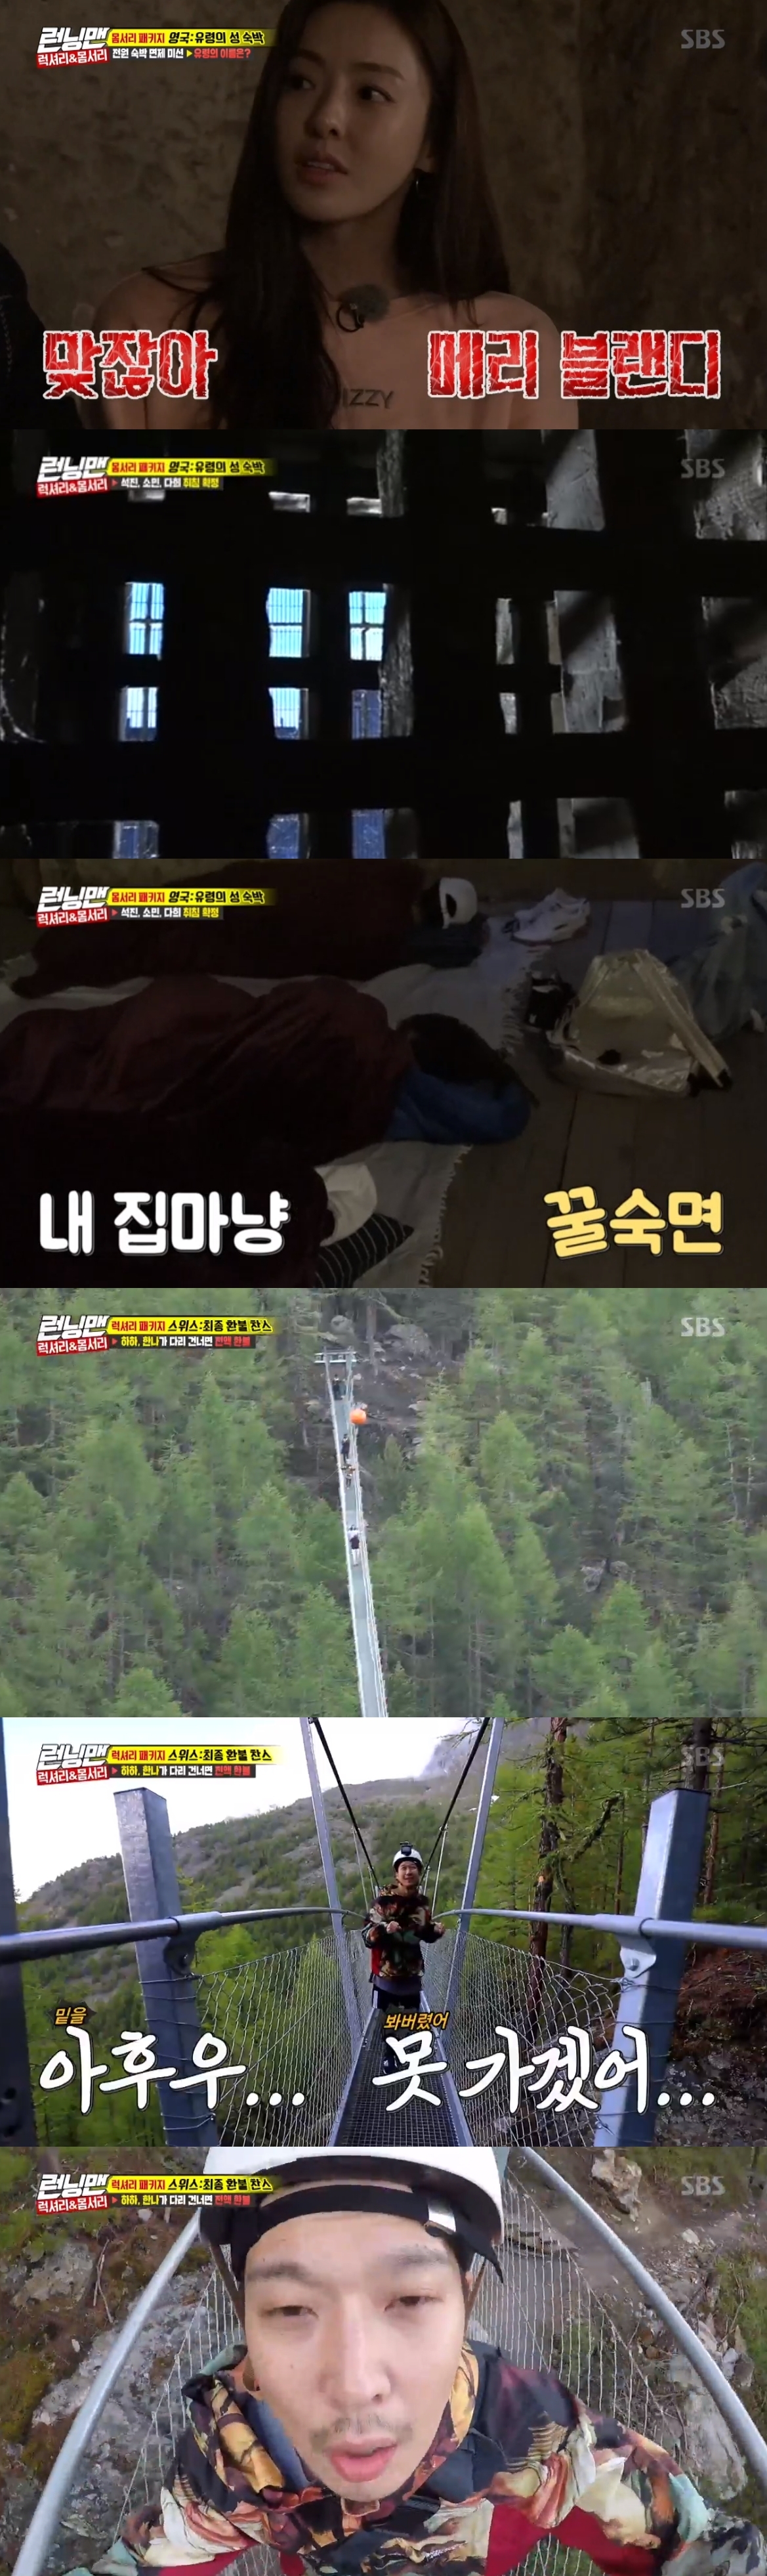 Seoul = = Running Man members have completed luxury and body-surprising global projects.On SBS Running Man broadcasted at 4:50 pm on the 8th, members of the mission for the final settlement roulette were drawn.Choices survive on many rooms on the day, Choices the room with Kang Han-Na, and Haha Choices the room with Kang Han-Na in the situation where the room was a Rollet winner.Haha won the 900,000 won heliski cost; the 1.5 million won for meals was paid by Kang Han-Na.To settle the debt, you have to do one of three kinds of Switzerland body-surrounding courses, the production team suggested.Unfortunately, the weather was the only course that could be carried out in the world.Once again, Rolet returned and Kang Han-Na was caught; Kang Han-Na had expressed his intention to accompany Haha, so he declared, I will go with Haha.The next day Haha headed to the tug-of-war with Kang Han-Na, who expressed regret, saying he praised for the storm today.When they arrived in front of the bridge, Haha and Kang Han-Na were worried.Haha hesitated, saying, Ill pay for it, and Kang Han-Na persuaded him to come to Switzerland and cross over.After finishing crossing the bridge at the end of the twists and turns, the two took a commemorative photo and accumulated memories.In the UK, Lee Kwang-soo was penalized for three phases of wing walking; three phases include basic flight, twist and vertical descent.After the flight, Lee Kwang-soo struggled down; the members cheered for such Lee Kwang-soo, saying Thank you.The last course was Phantoms castle accommodation; when we moved underground, Yoo Jae-Suk said, I hate this, I wonder if its haunting you.To tell the history of Oxford Castle, the production team screened the video, and the members were afraid that I think it will come out in my dream when I sleep just by watching the video.The production team proposed a righteous game over the right to stay in the country; Lee Kwang-soo said, Everything else can be done well, but the righteous game is difficult.Later members went out looking for letters alone to name Phantom, and Lee Kwang-soo, Yoo Jae-Suk and Ji Suk-jin declared abandonment.Those who failed to find the letter came up with five letters starting with Bl and presented Blairs location as an answer, but it was wrong.Eventually, the members had to sleep at Phantoms castle; the next day, Ji Suk-jin was satisfied, I think the place is good here, I never dreamed and slept well.